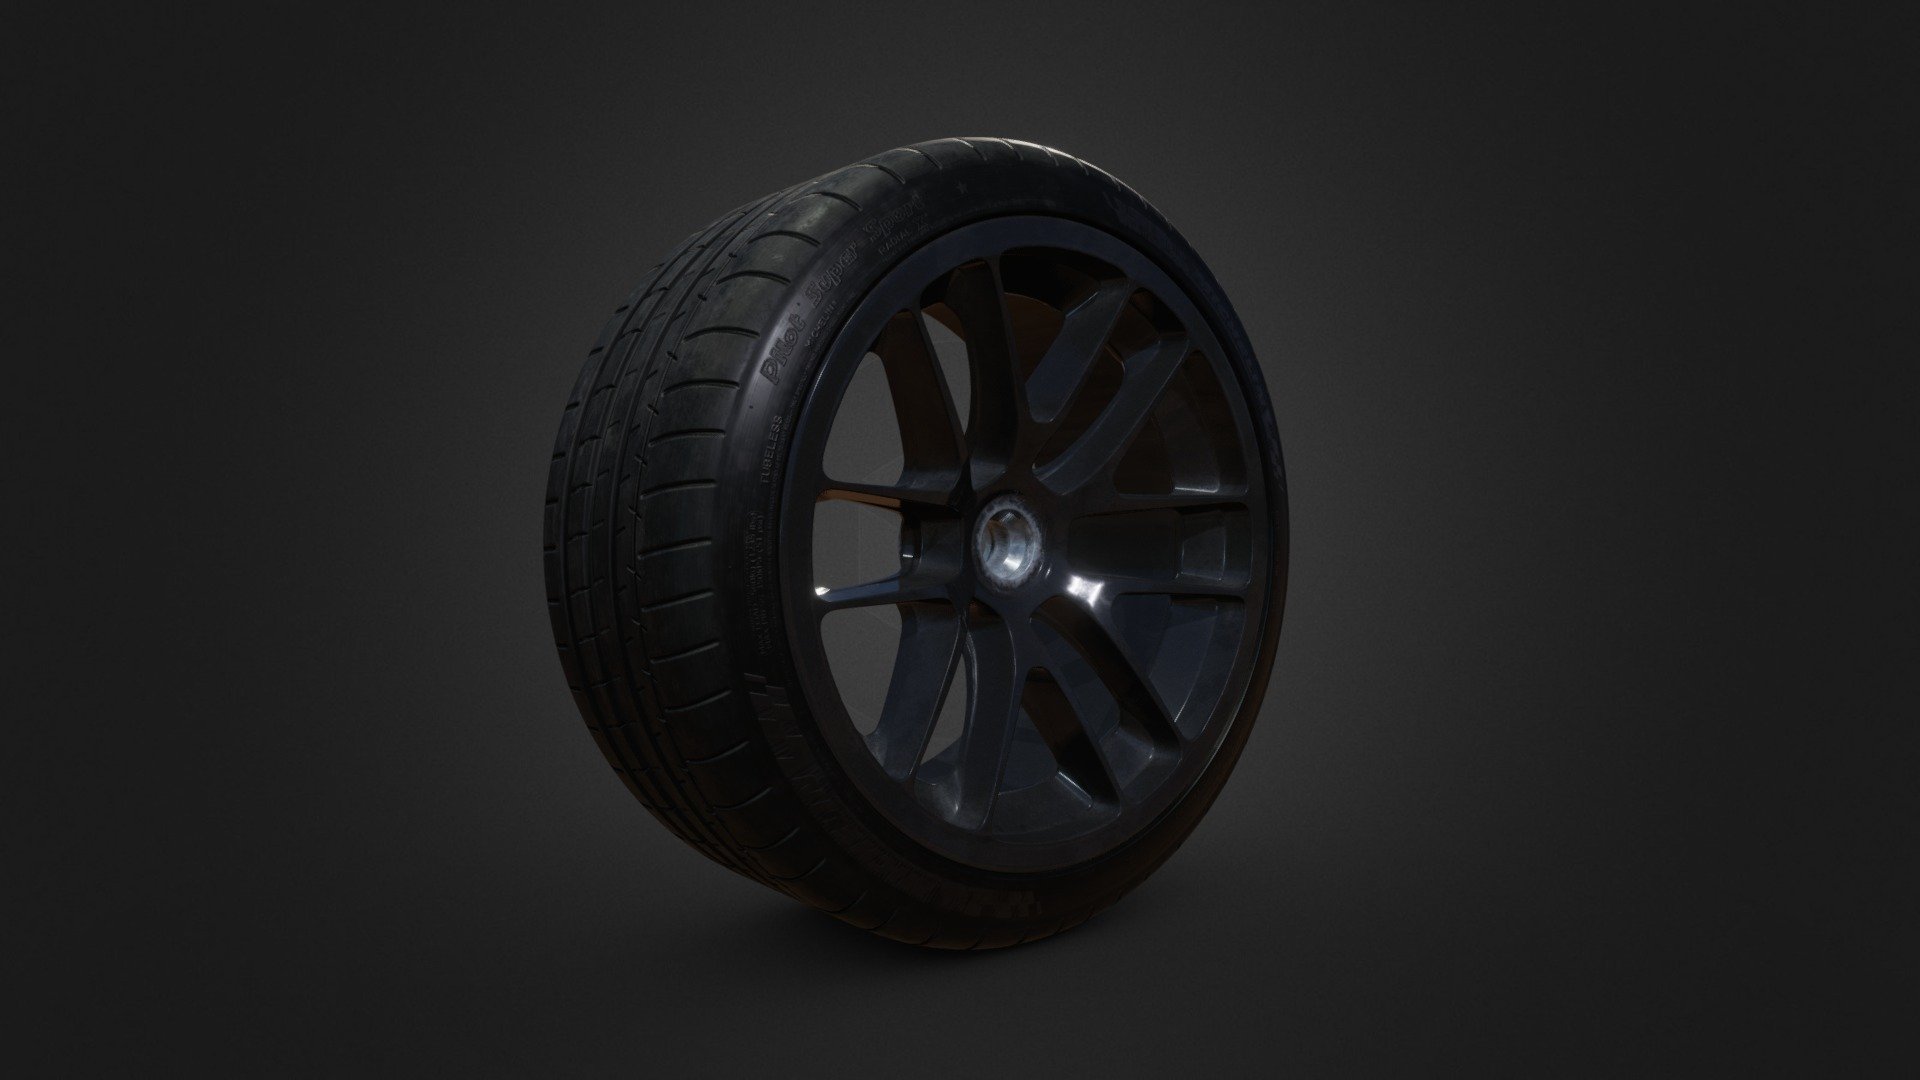 50% off
High detailed PBR model of Michelin Pilot Super Sport tire and GT 3 rim with a mid polygon count LOD 0, keeping the details very high and realistic.
The model is AAA game ready with high detail PBR

3D StudioMax, Substance Painter

If you liked this model, check some of my other desighs 3d model